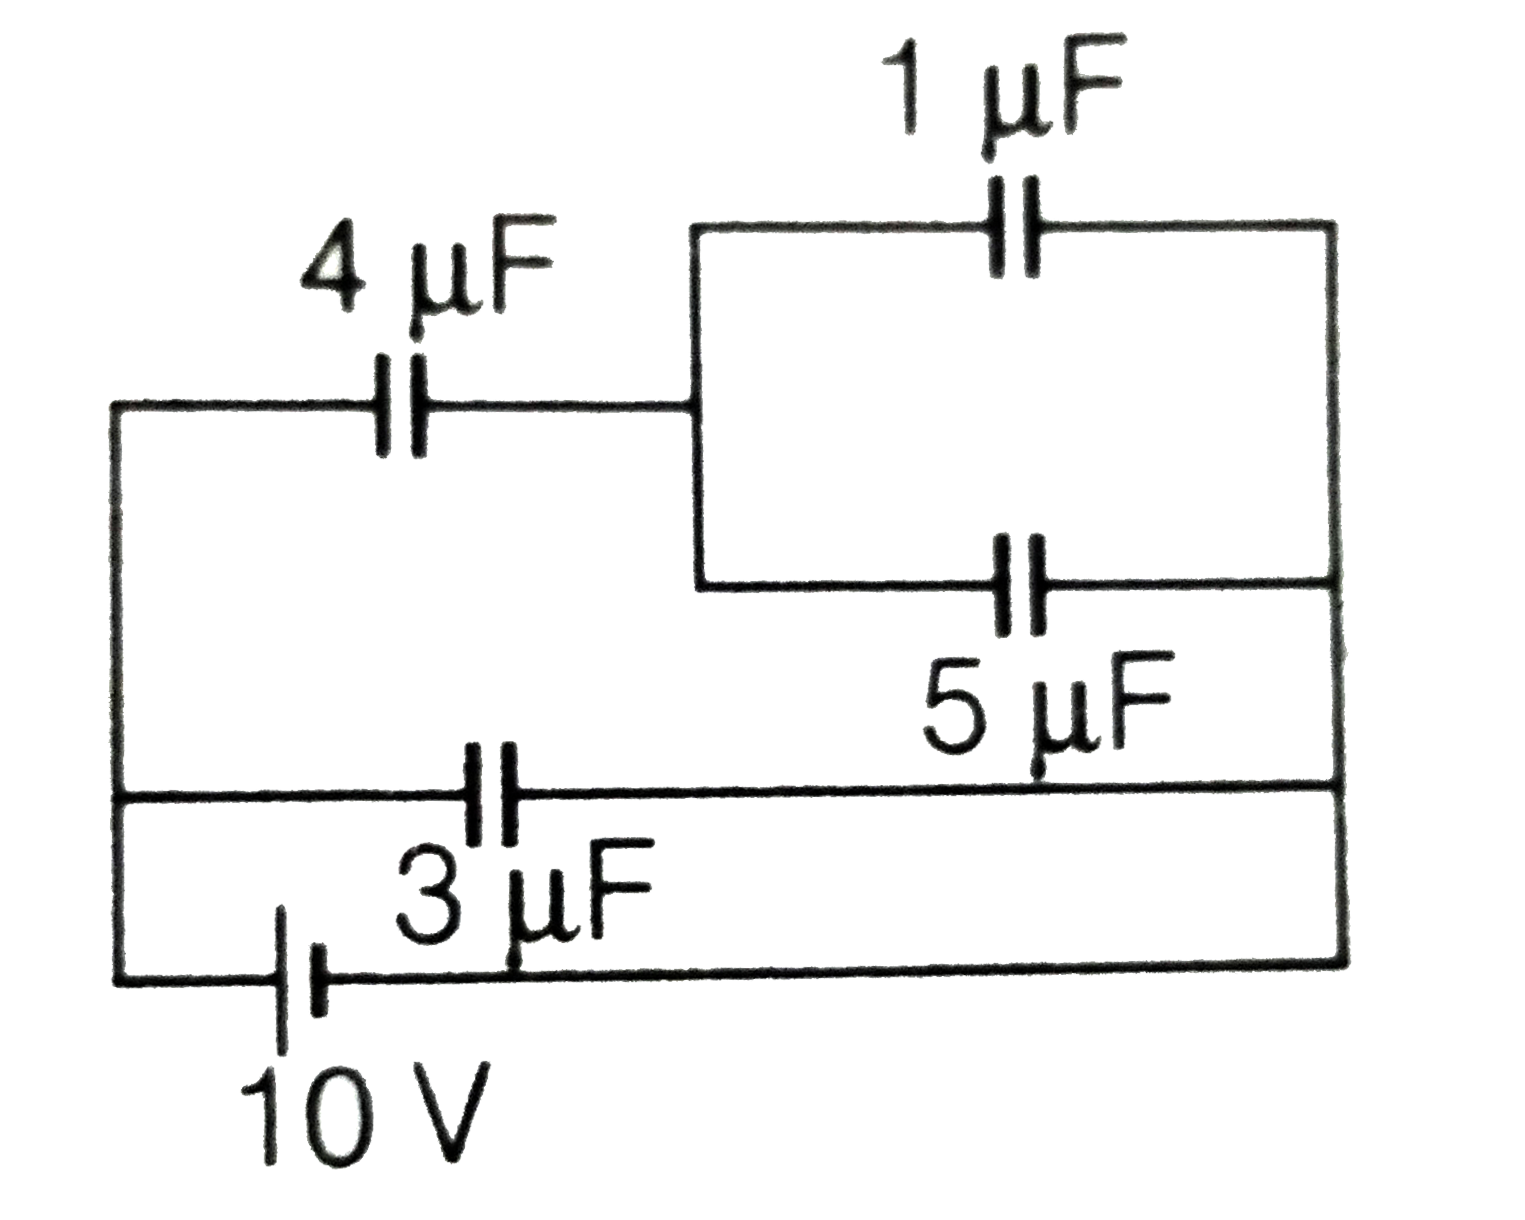 The cahrge on 4muF capacitor in the given circuit (in muC) is